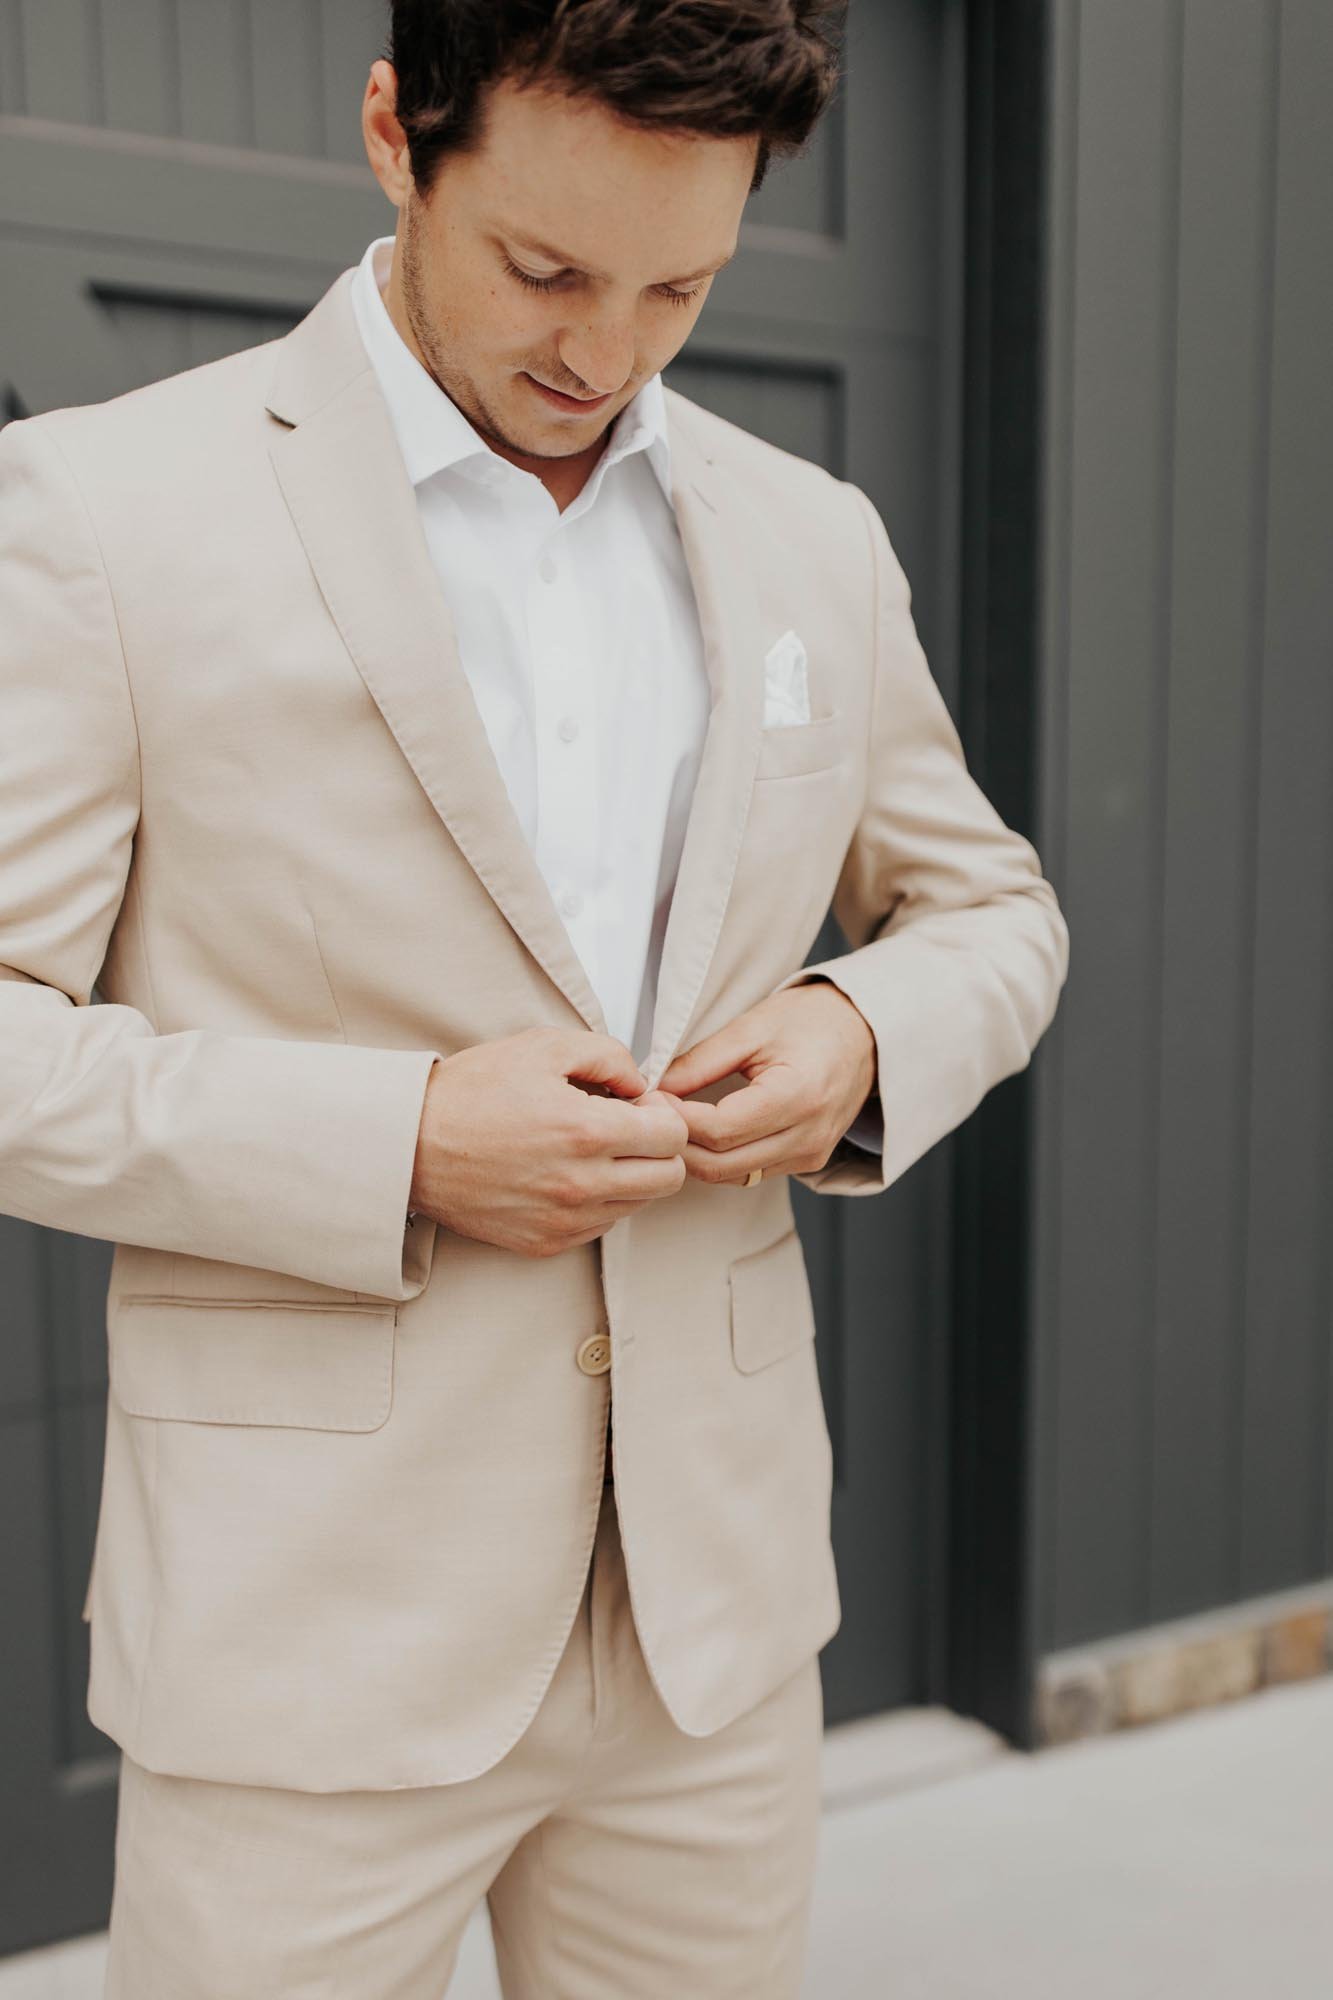  A groom wearing a tan suit buttoning his jacket standing in front of a black painted barn while waiting for the first look with his bride.  